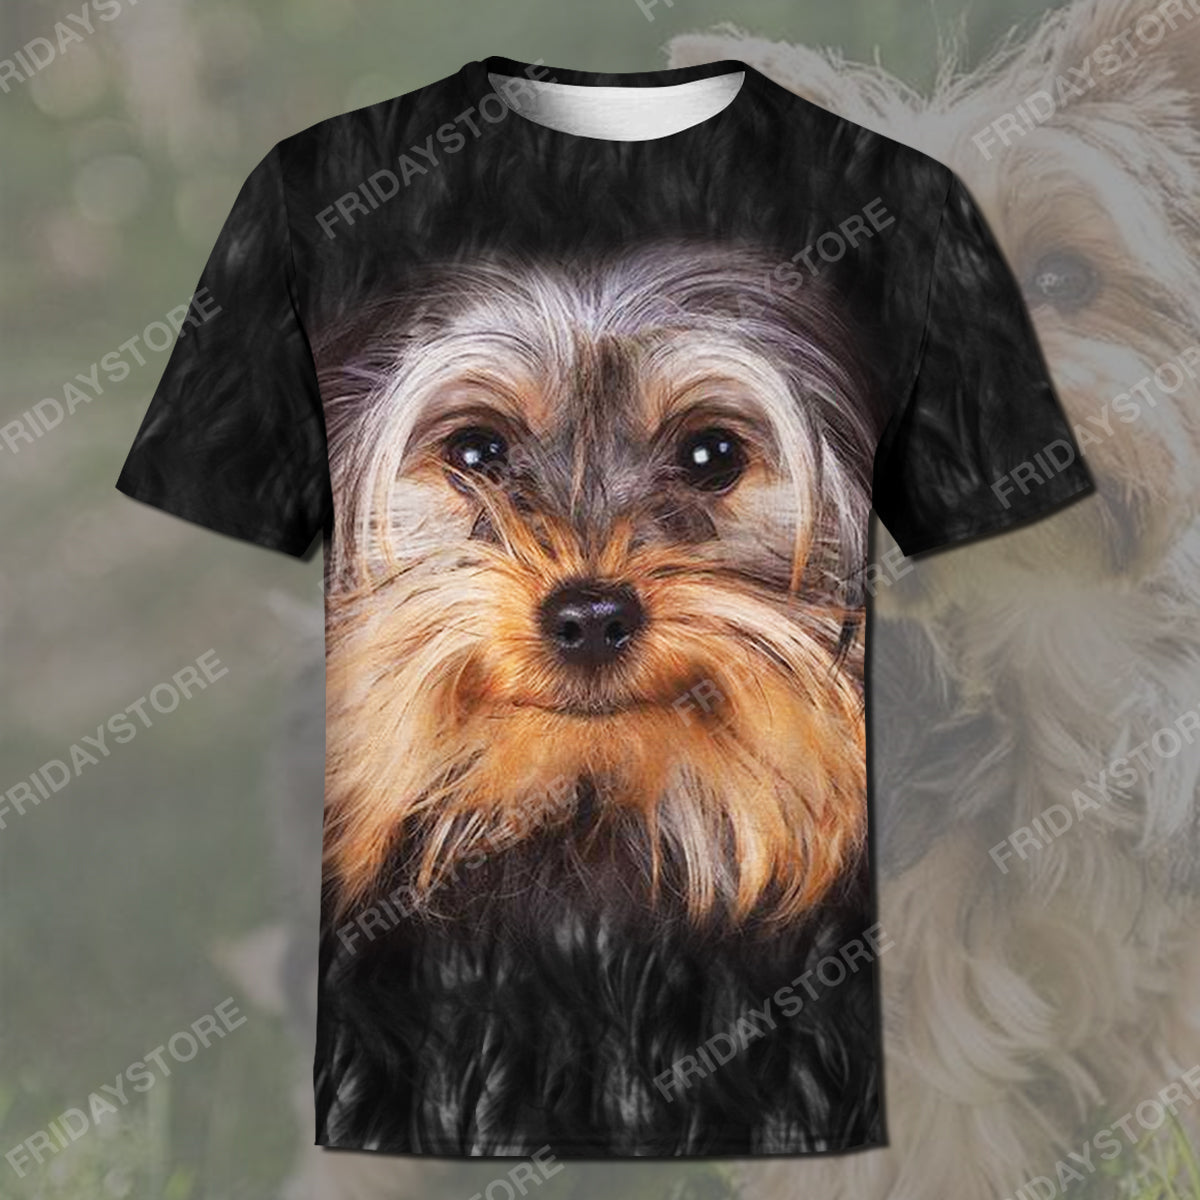 Unifinz Dog Hoodie Yorkshire Terrier Black Hoodie Yorkshire Terrier Dog Graphic Shirt Cute Dog Shirt Sweater Tank For Dog Lovers 2025